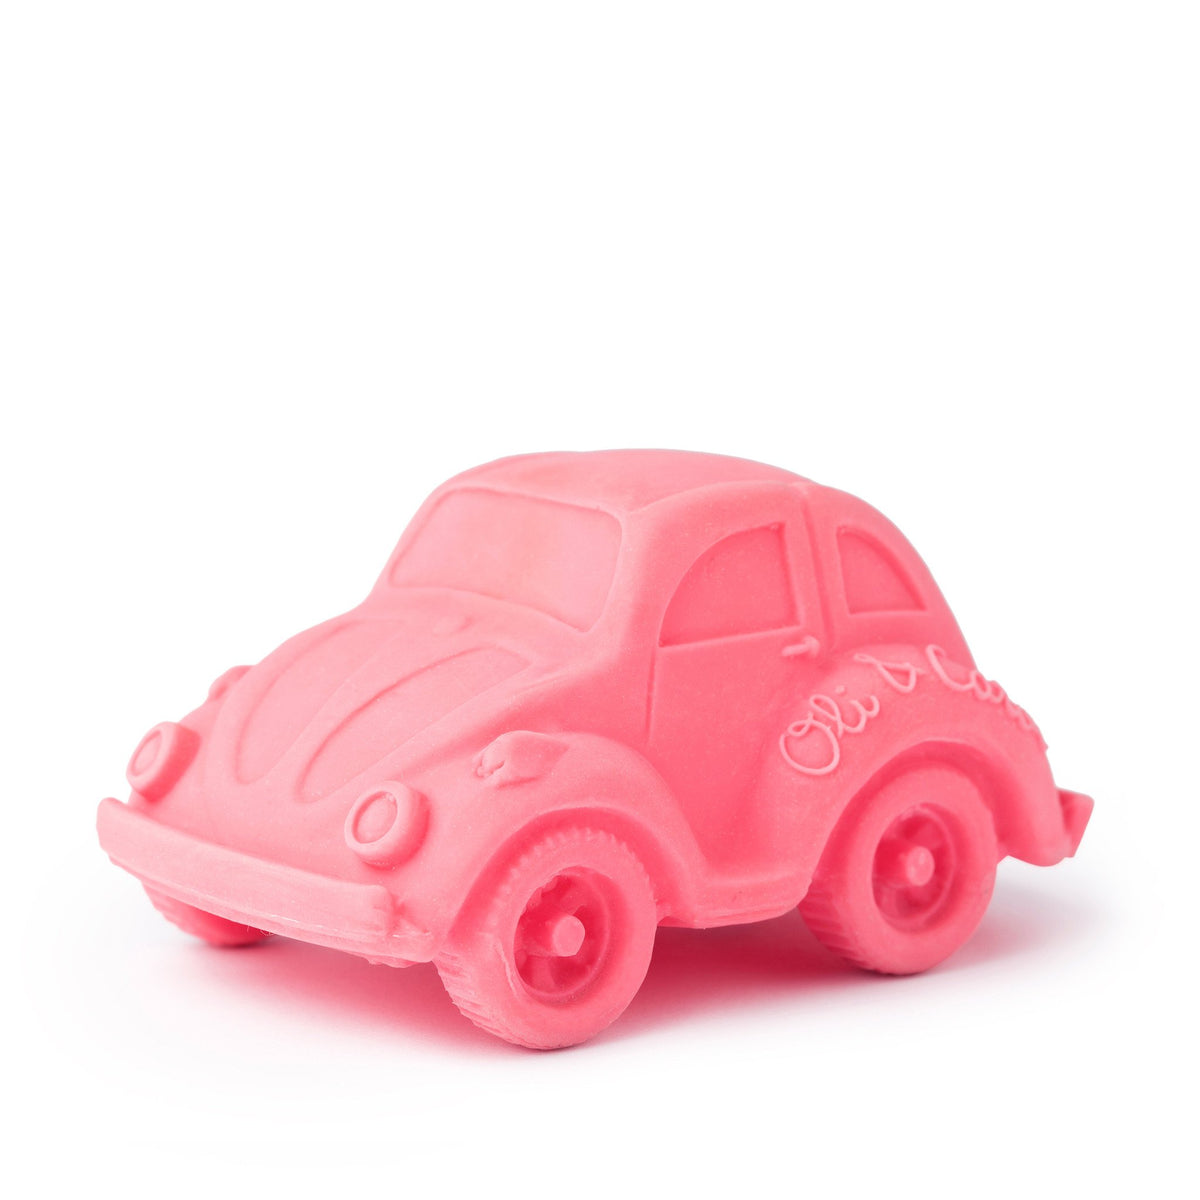 oli-and-carol-small-beetle-cars-in-6-colors-baby-play-learn-swim-olic-l-bc-04